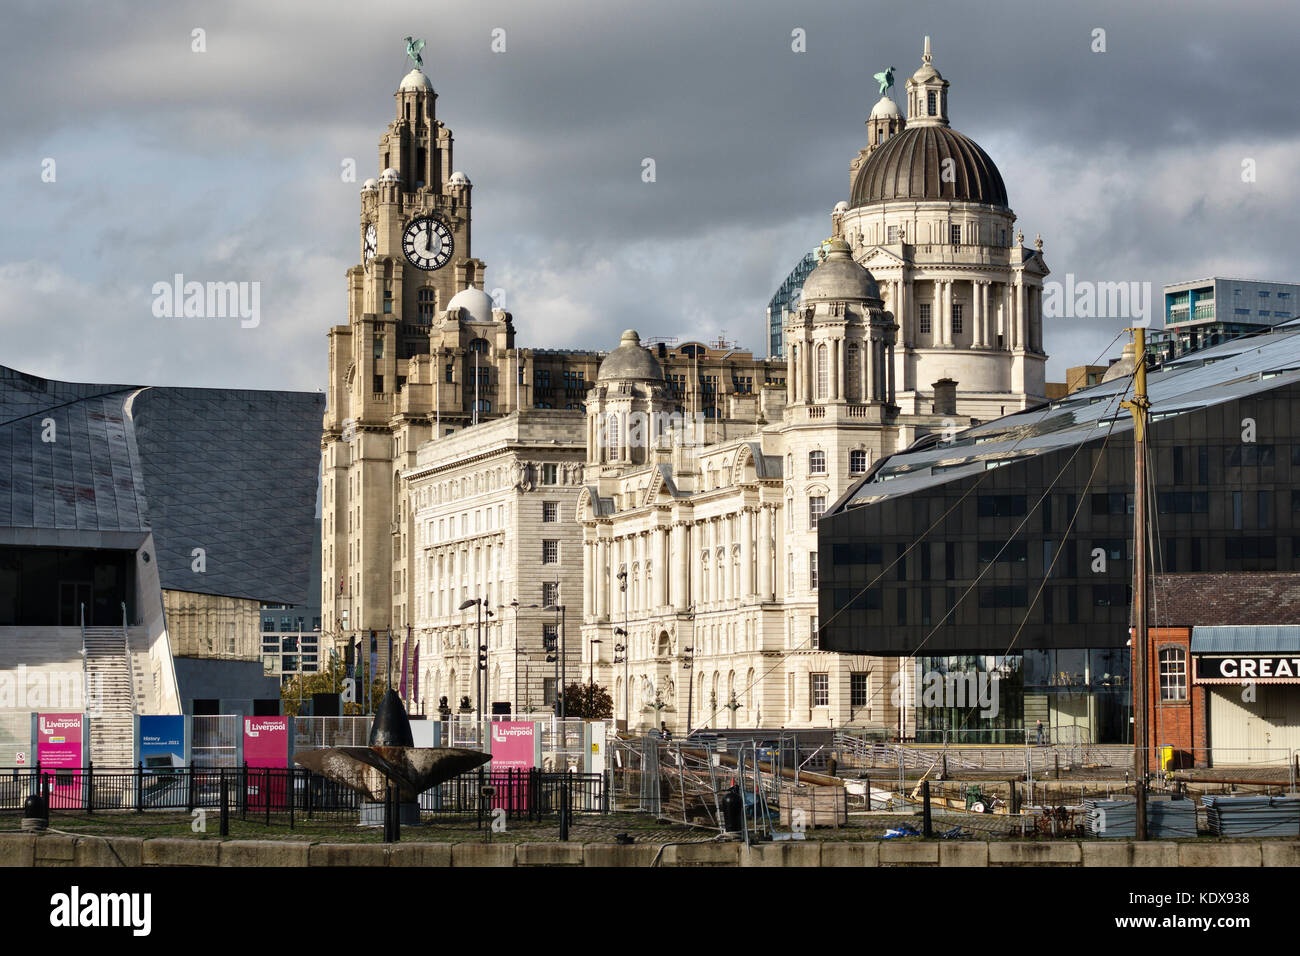 Liverpool, UK. The Port of Liverpool Building at Pier Head, with part of the new RIBA North building, and the Royal Liver Building in the background Stock Photo